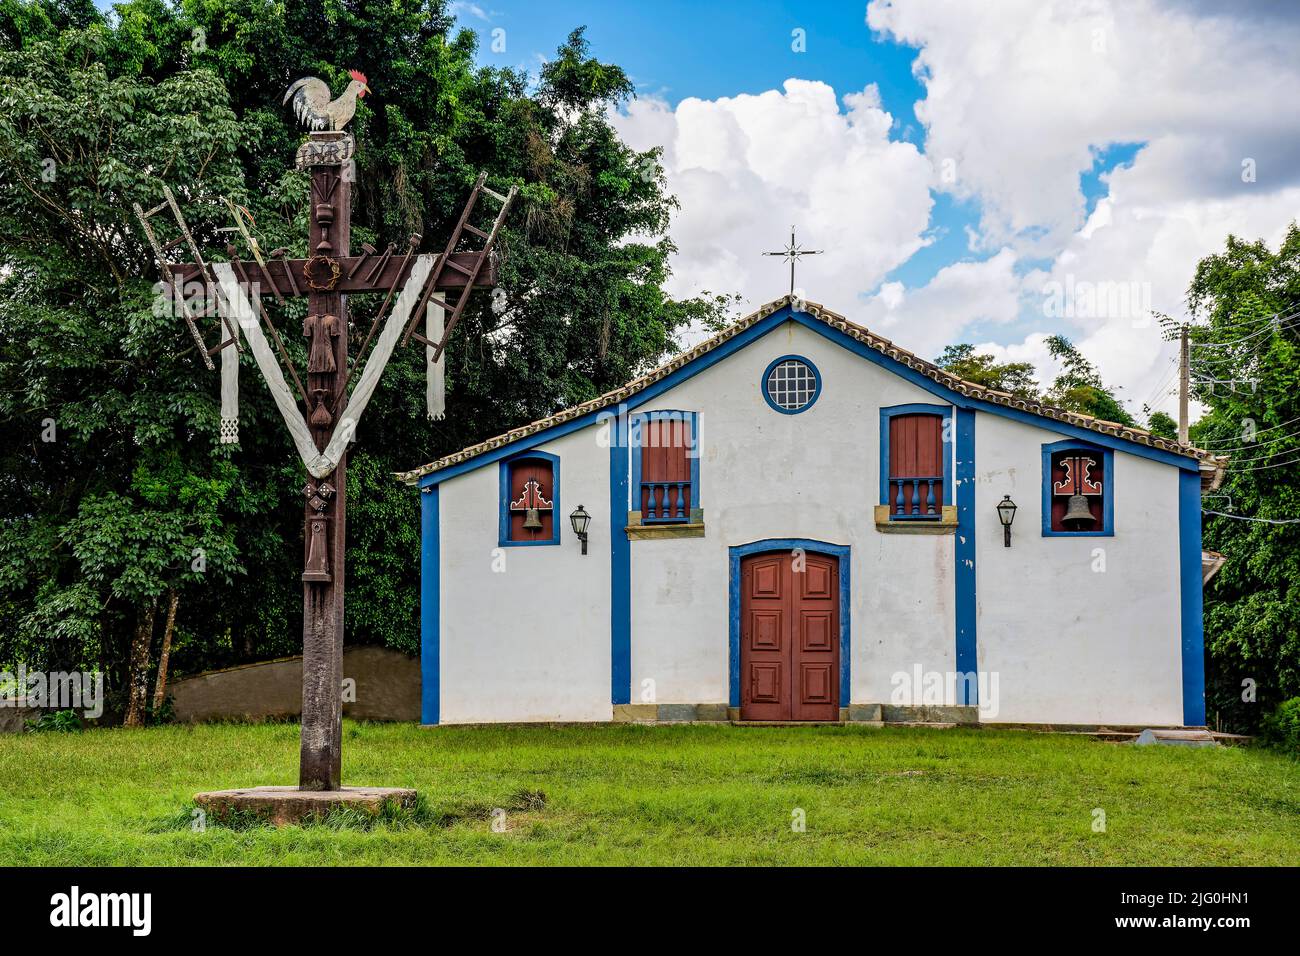 Small historic church amidst the vegetation in the city of Tiradentes in the state of Minas Gerais, Brazil Stock Photo